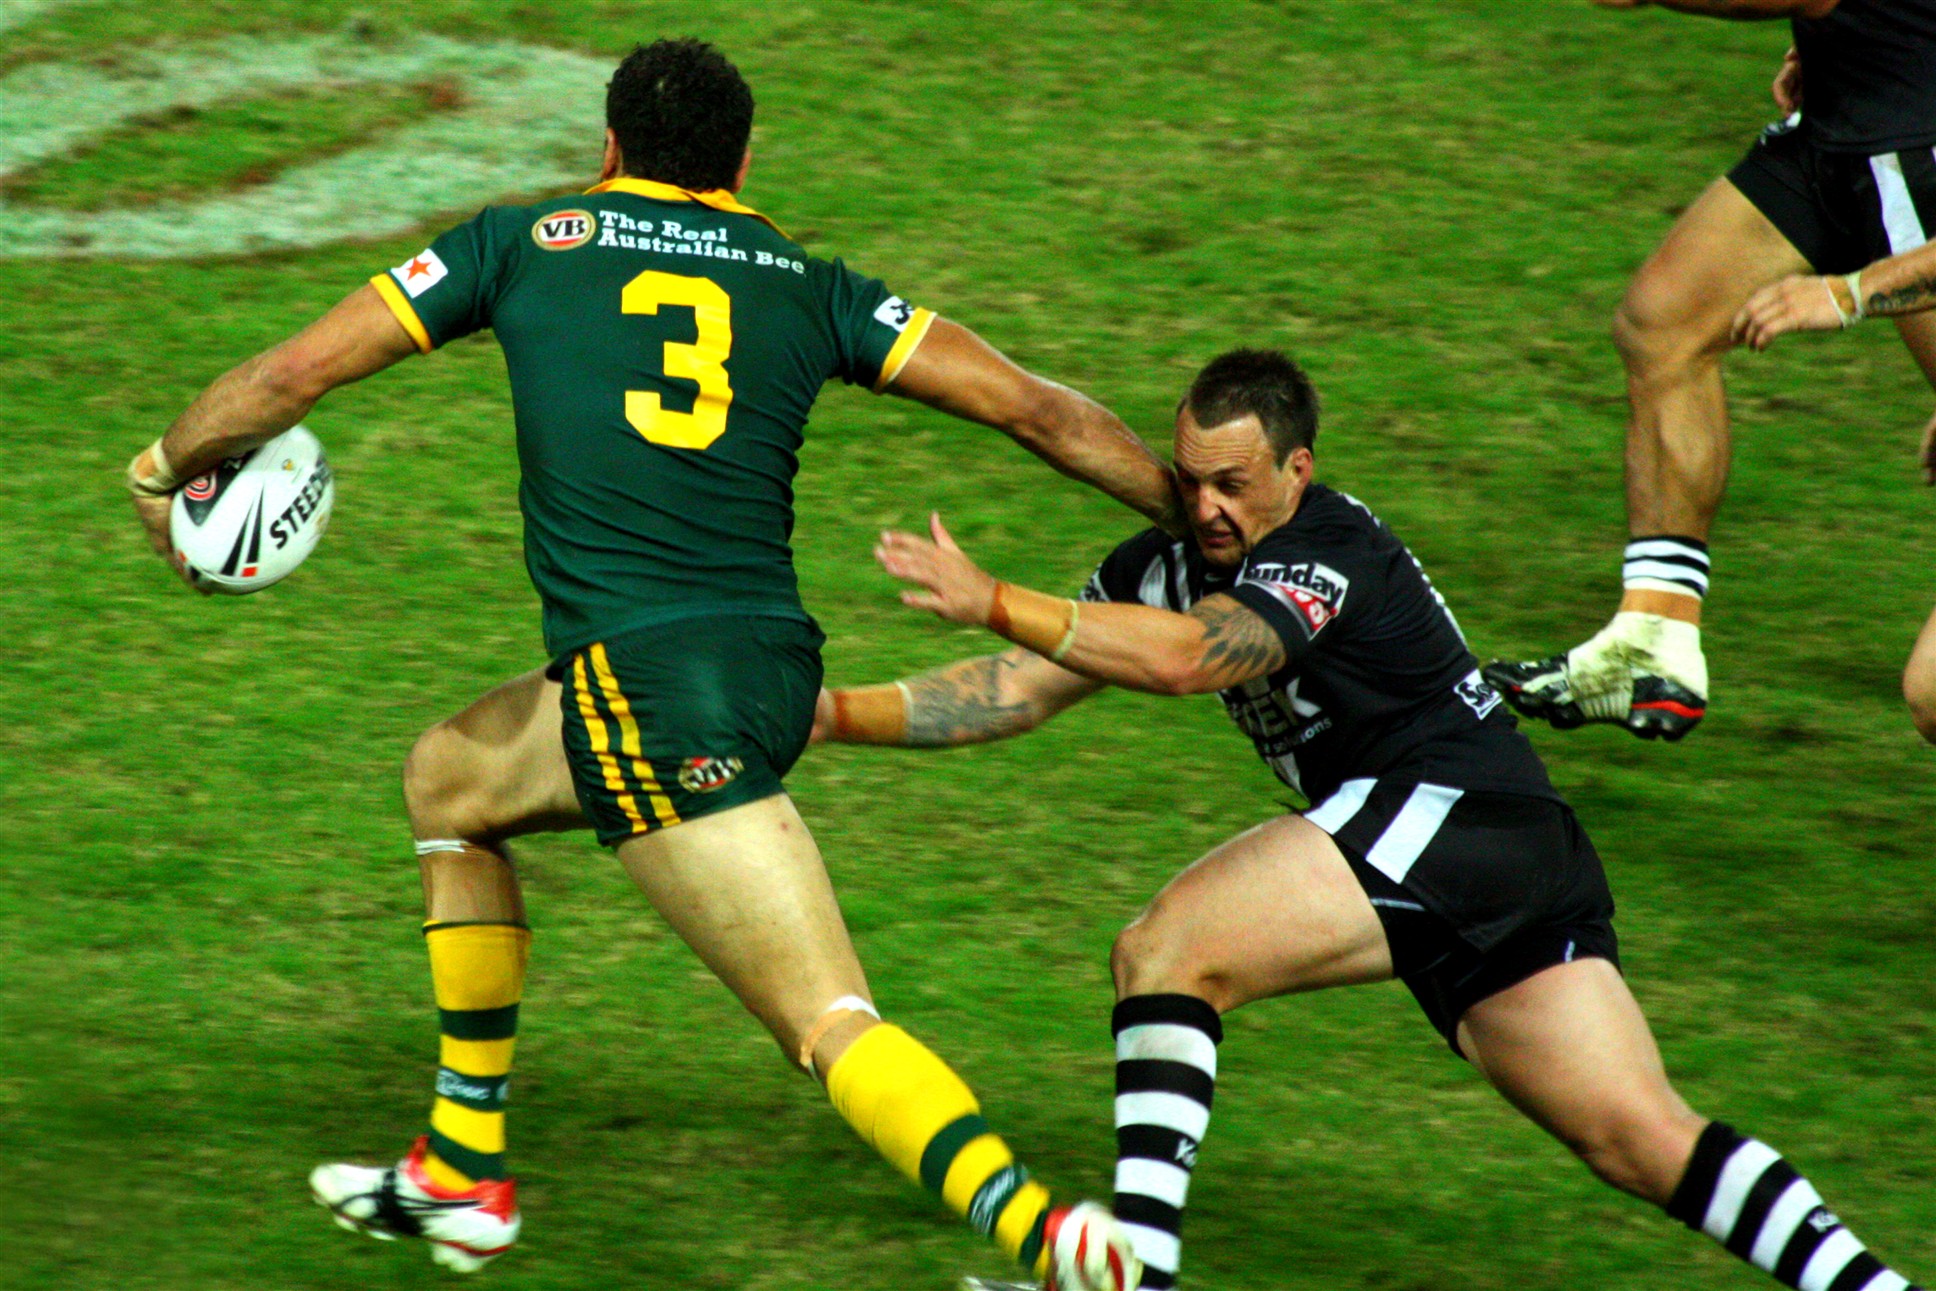 the rugby players are running after the ball